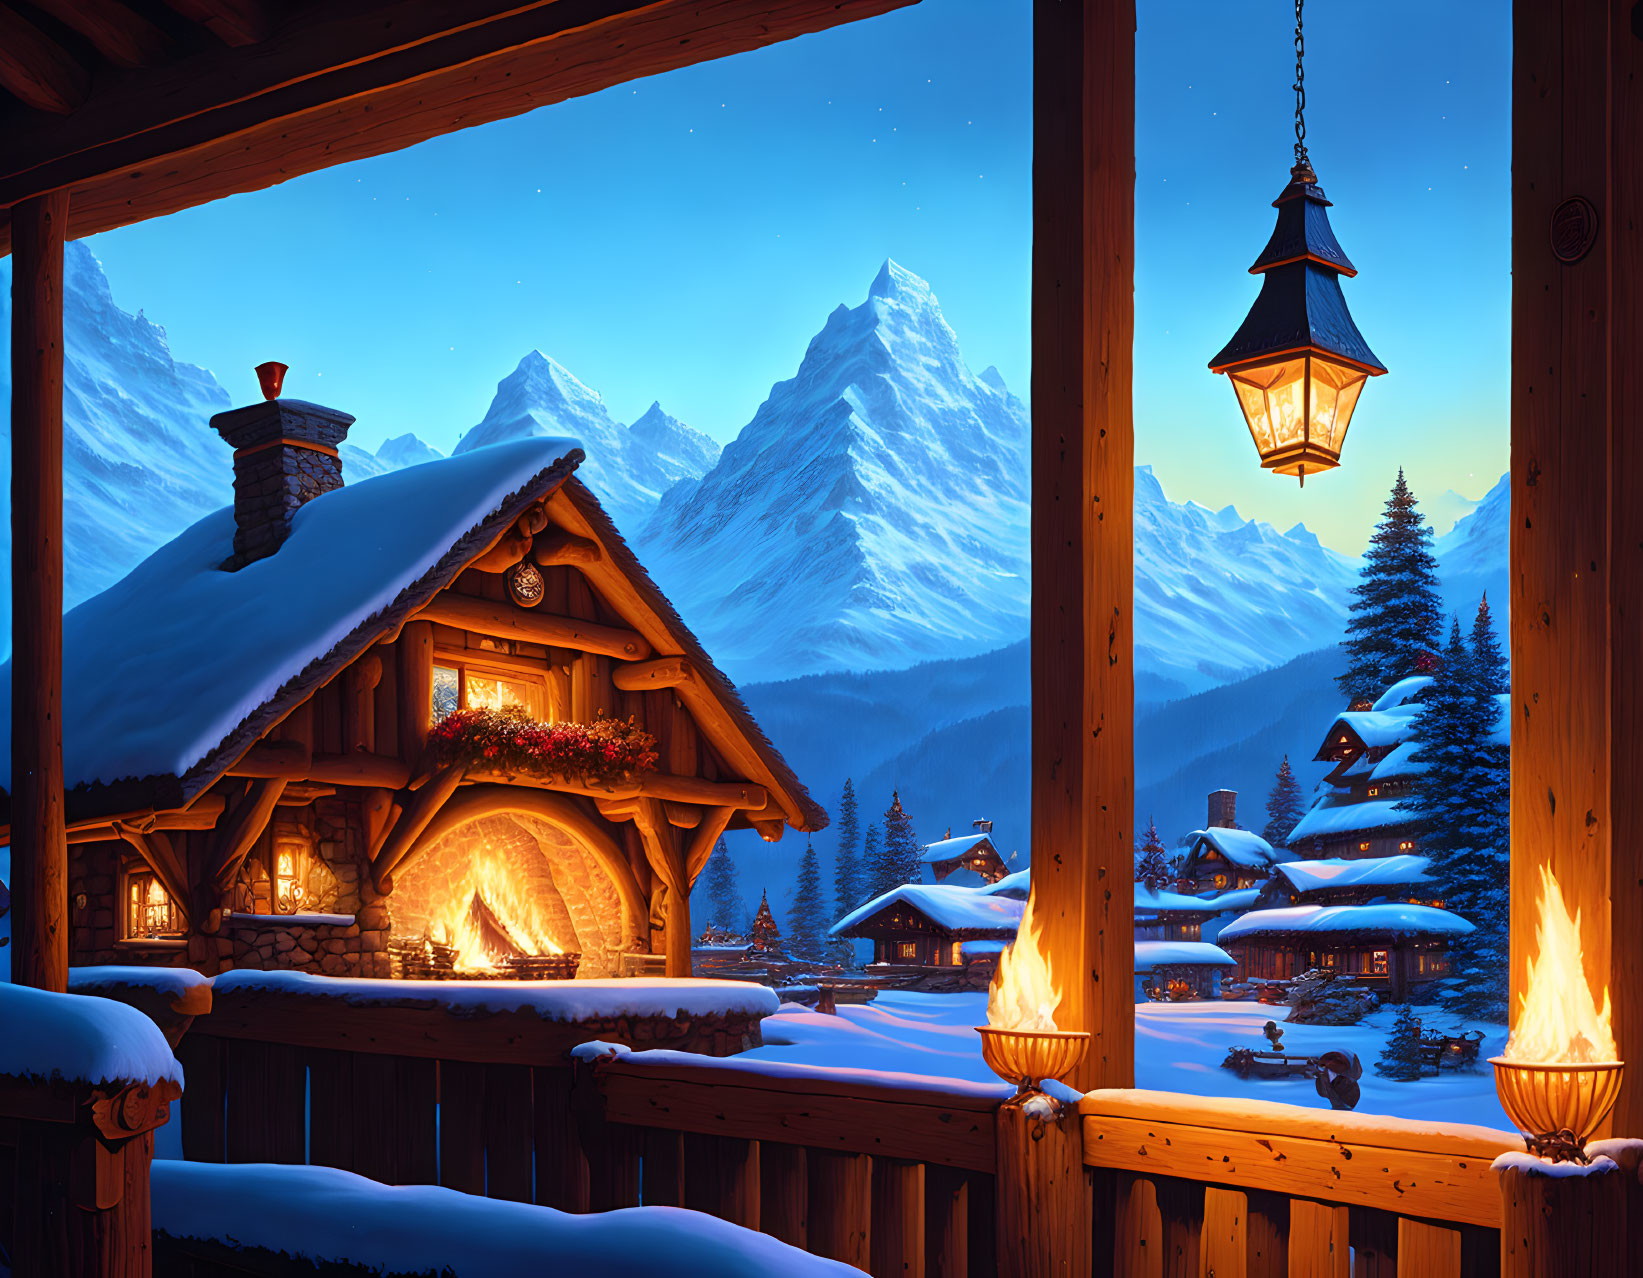 Snow-covered chalet with hanging lantern & starry night sky